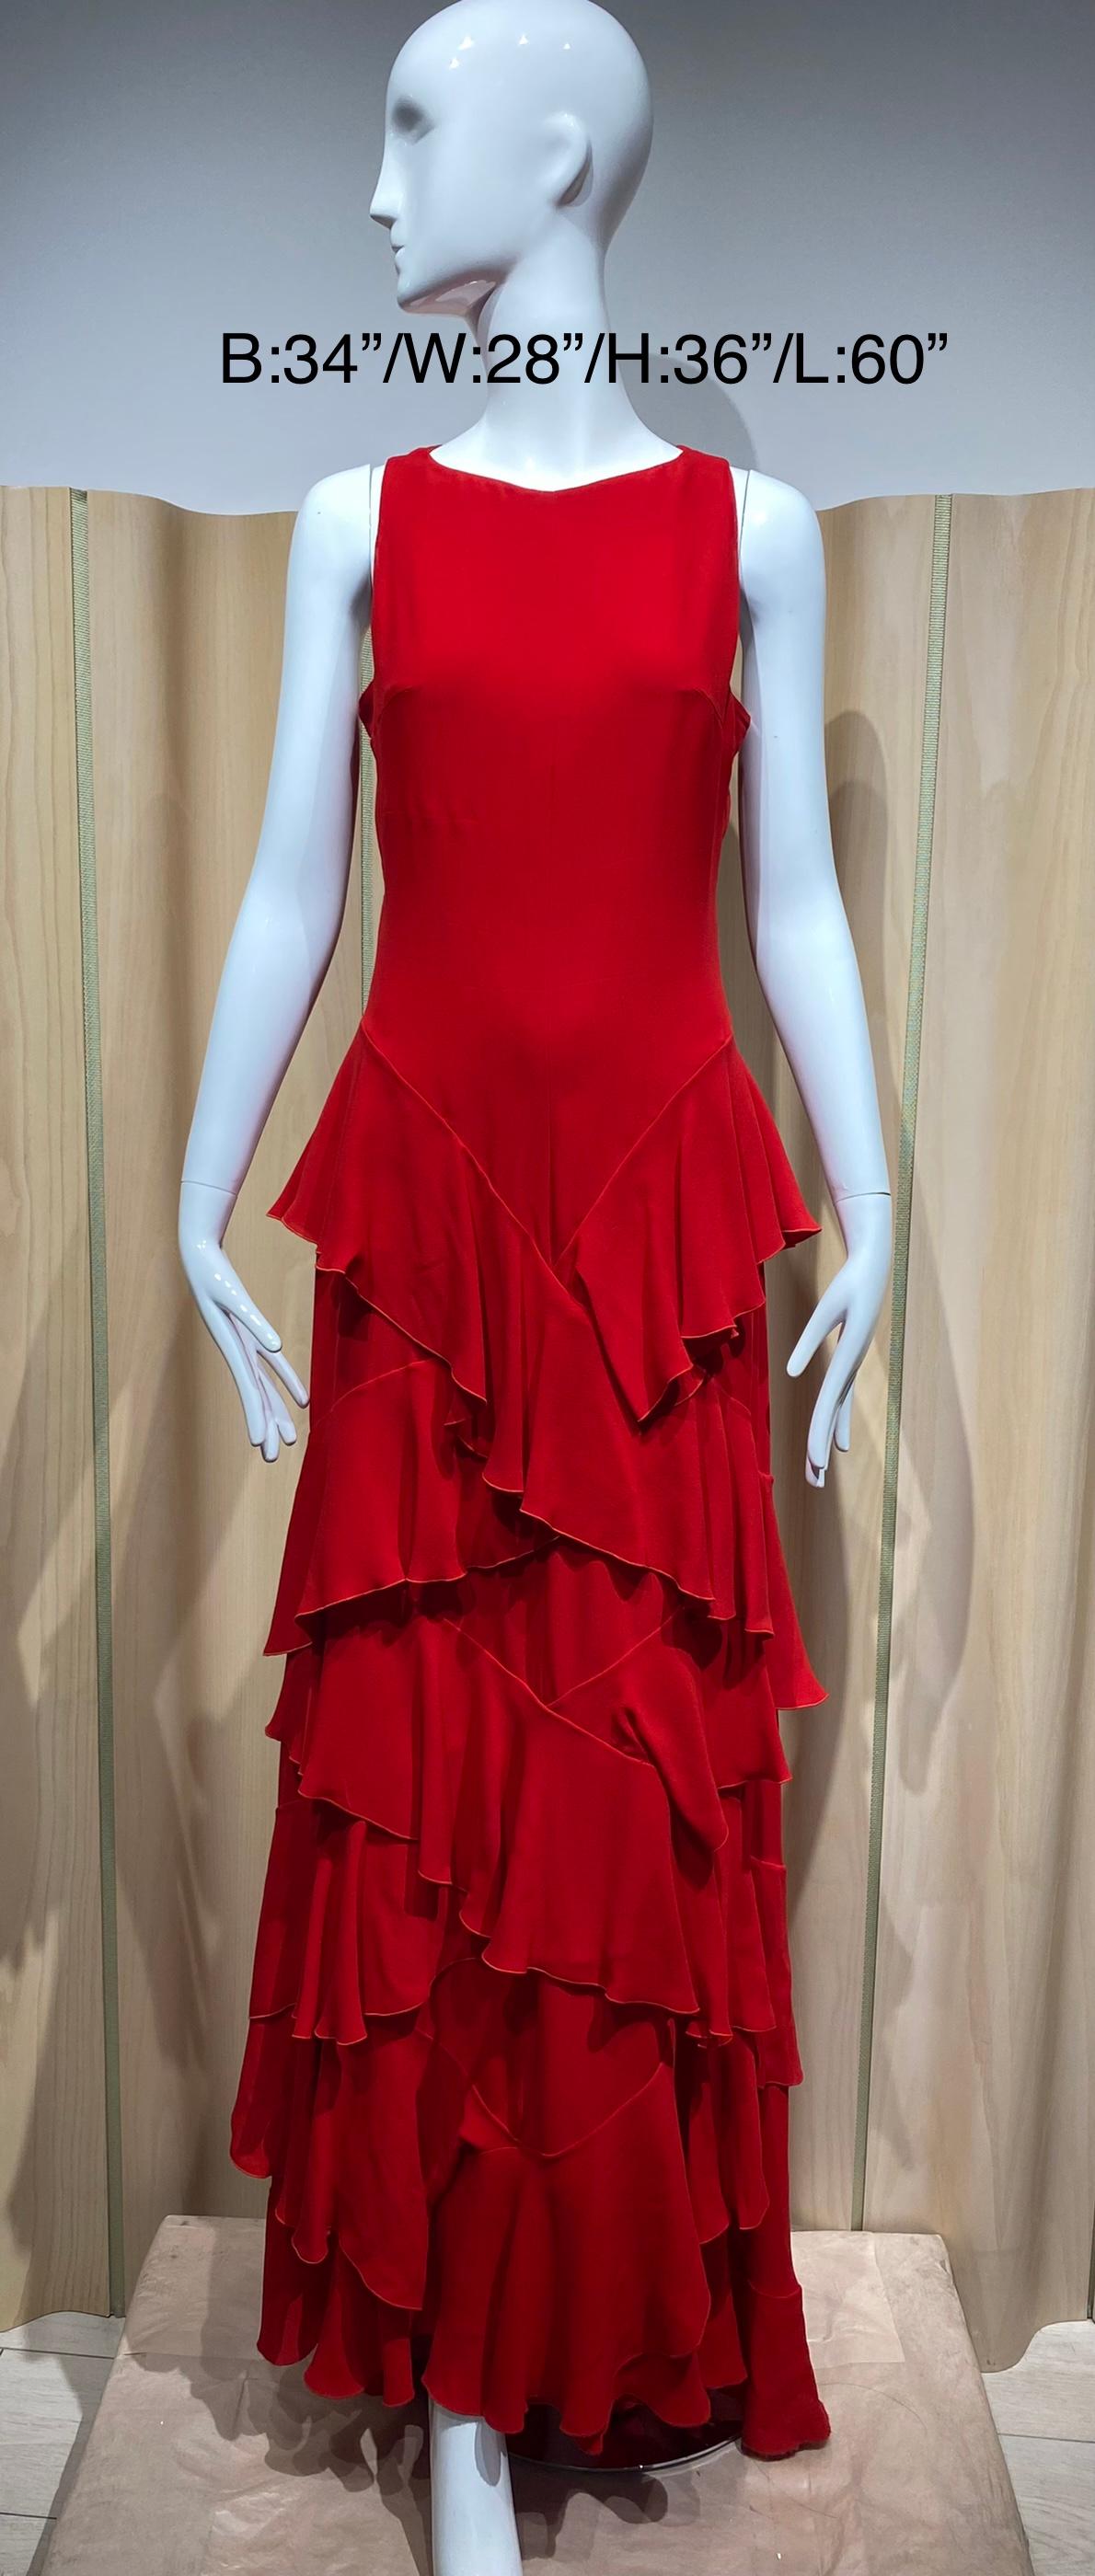 Valentino Red Sleeves gown with multi tier ruffle. Perfect for Holiday Cocktail Party.
Size 6
Measurement: Bust 34” / Waist 28” / Hip 36”/ Dress length : 60”